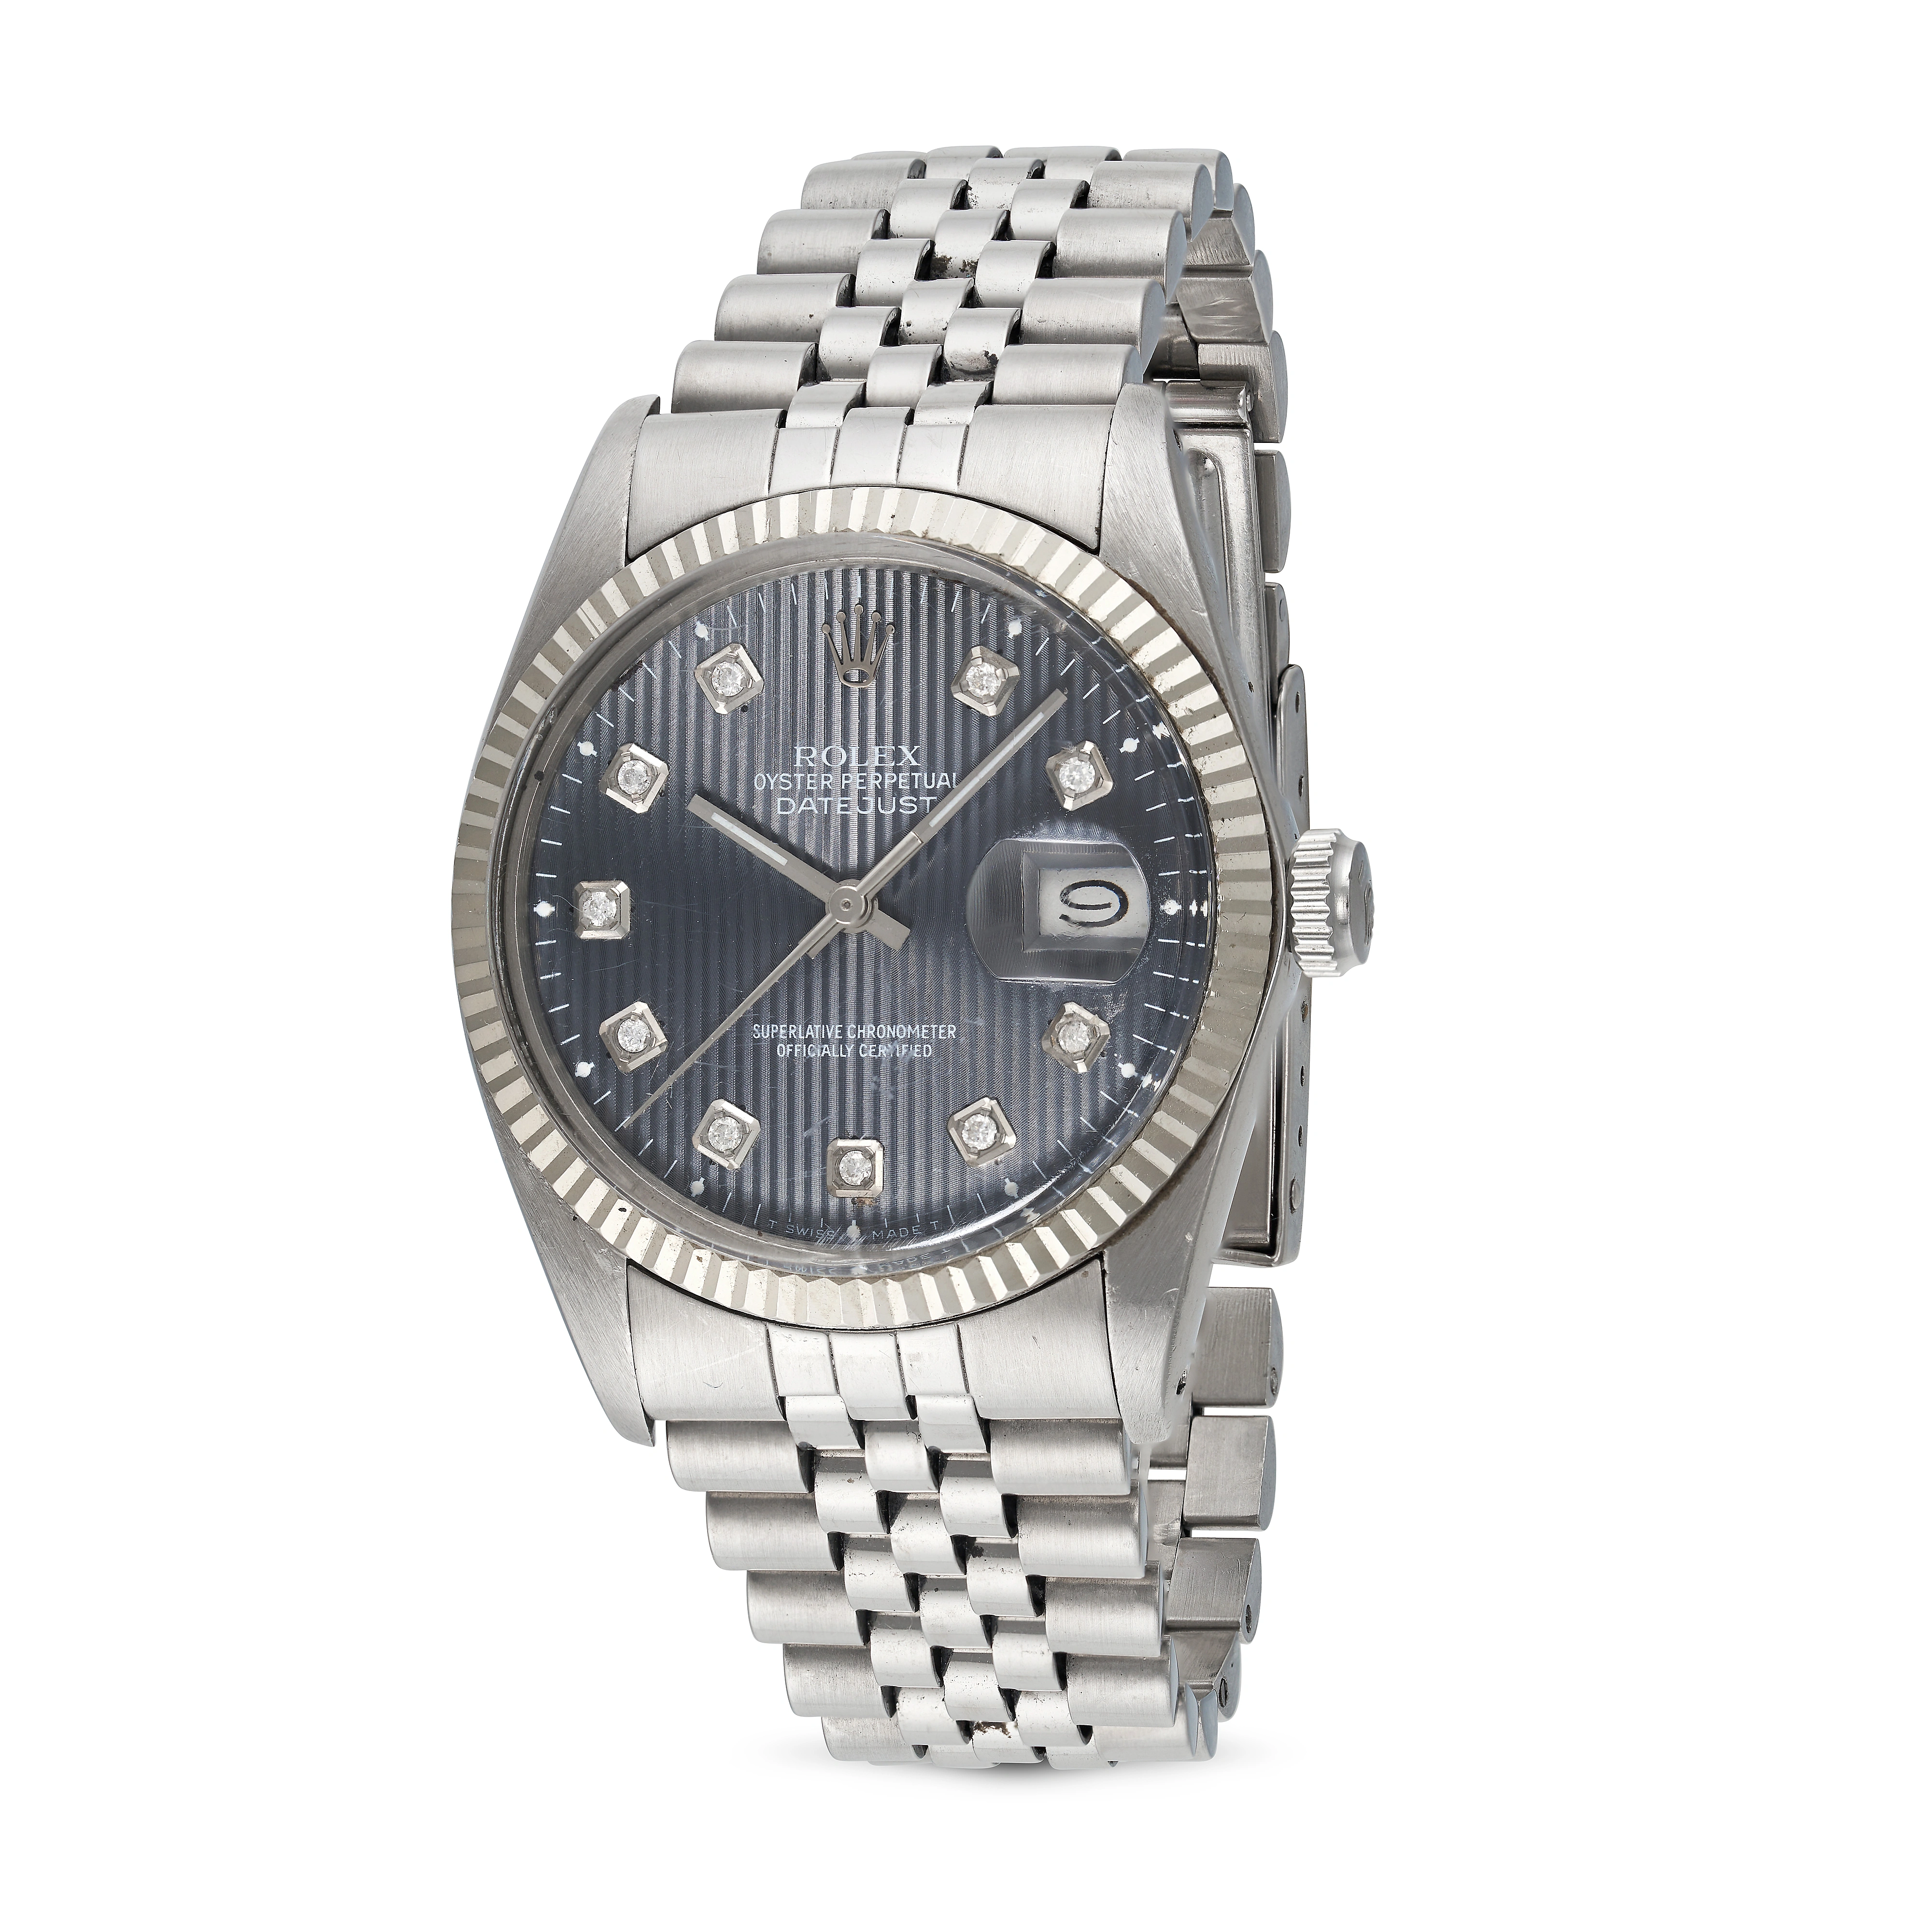 Rolex Datejust 36 16014 36mm Stainless steel Gray